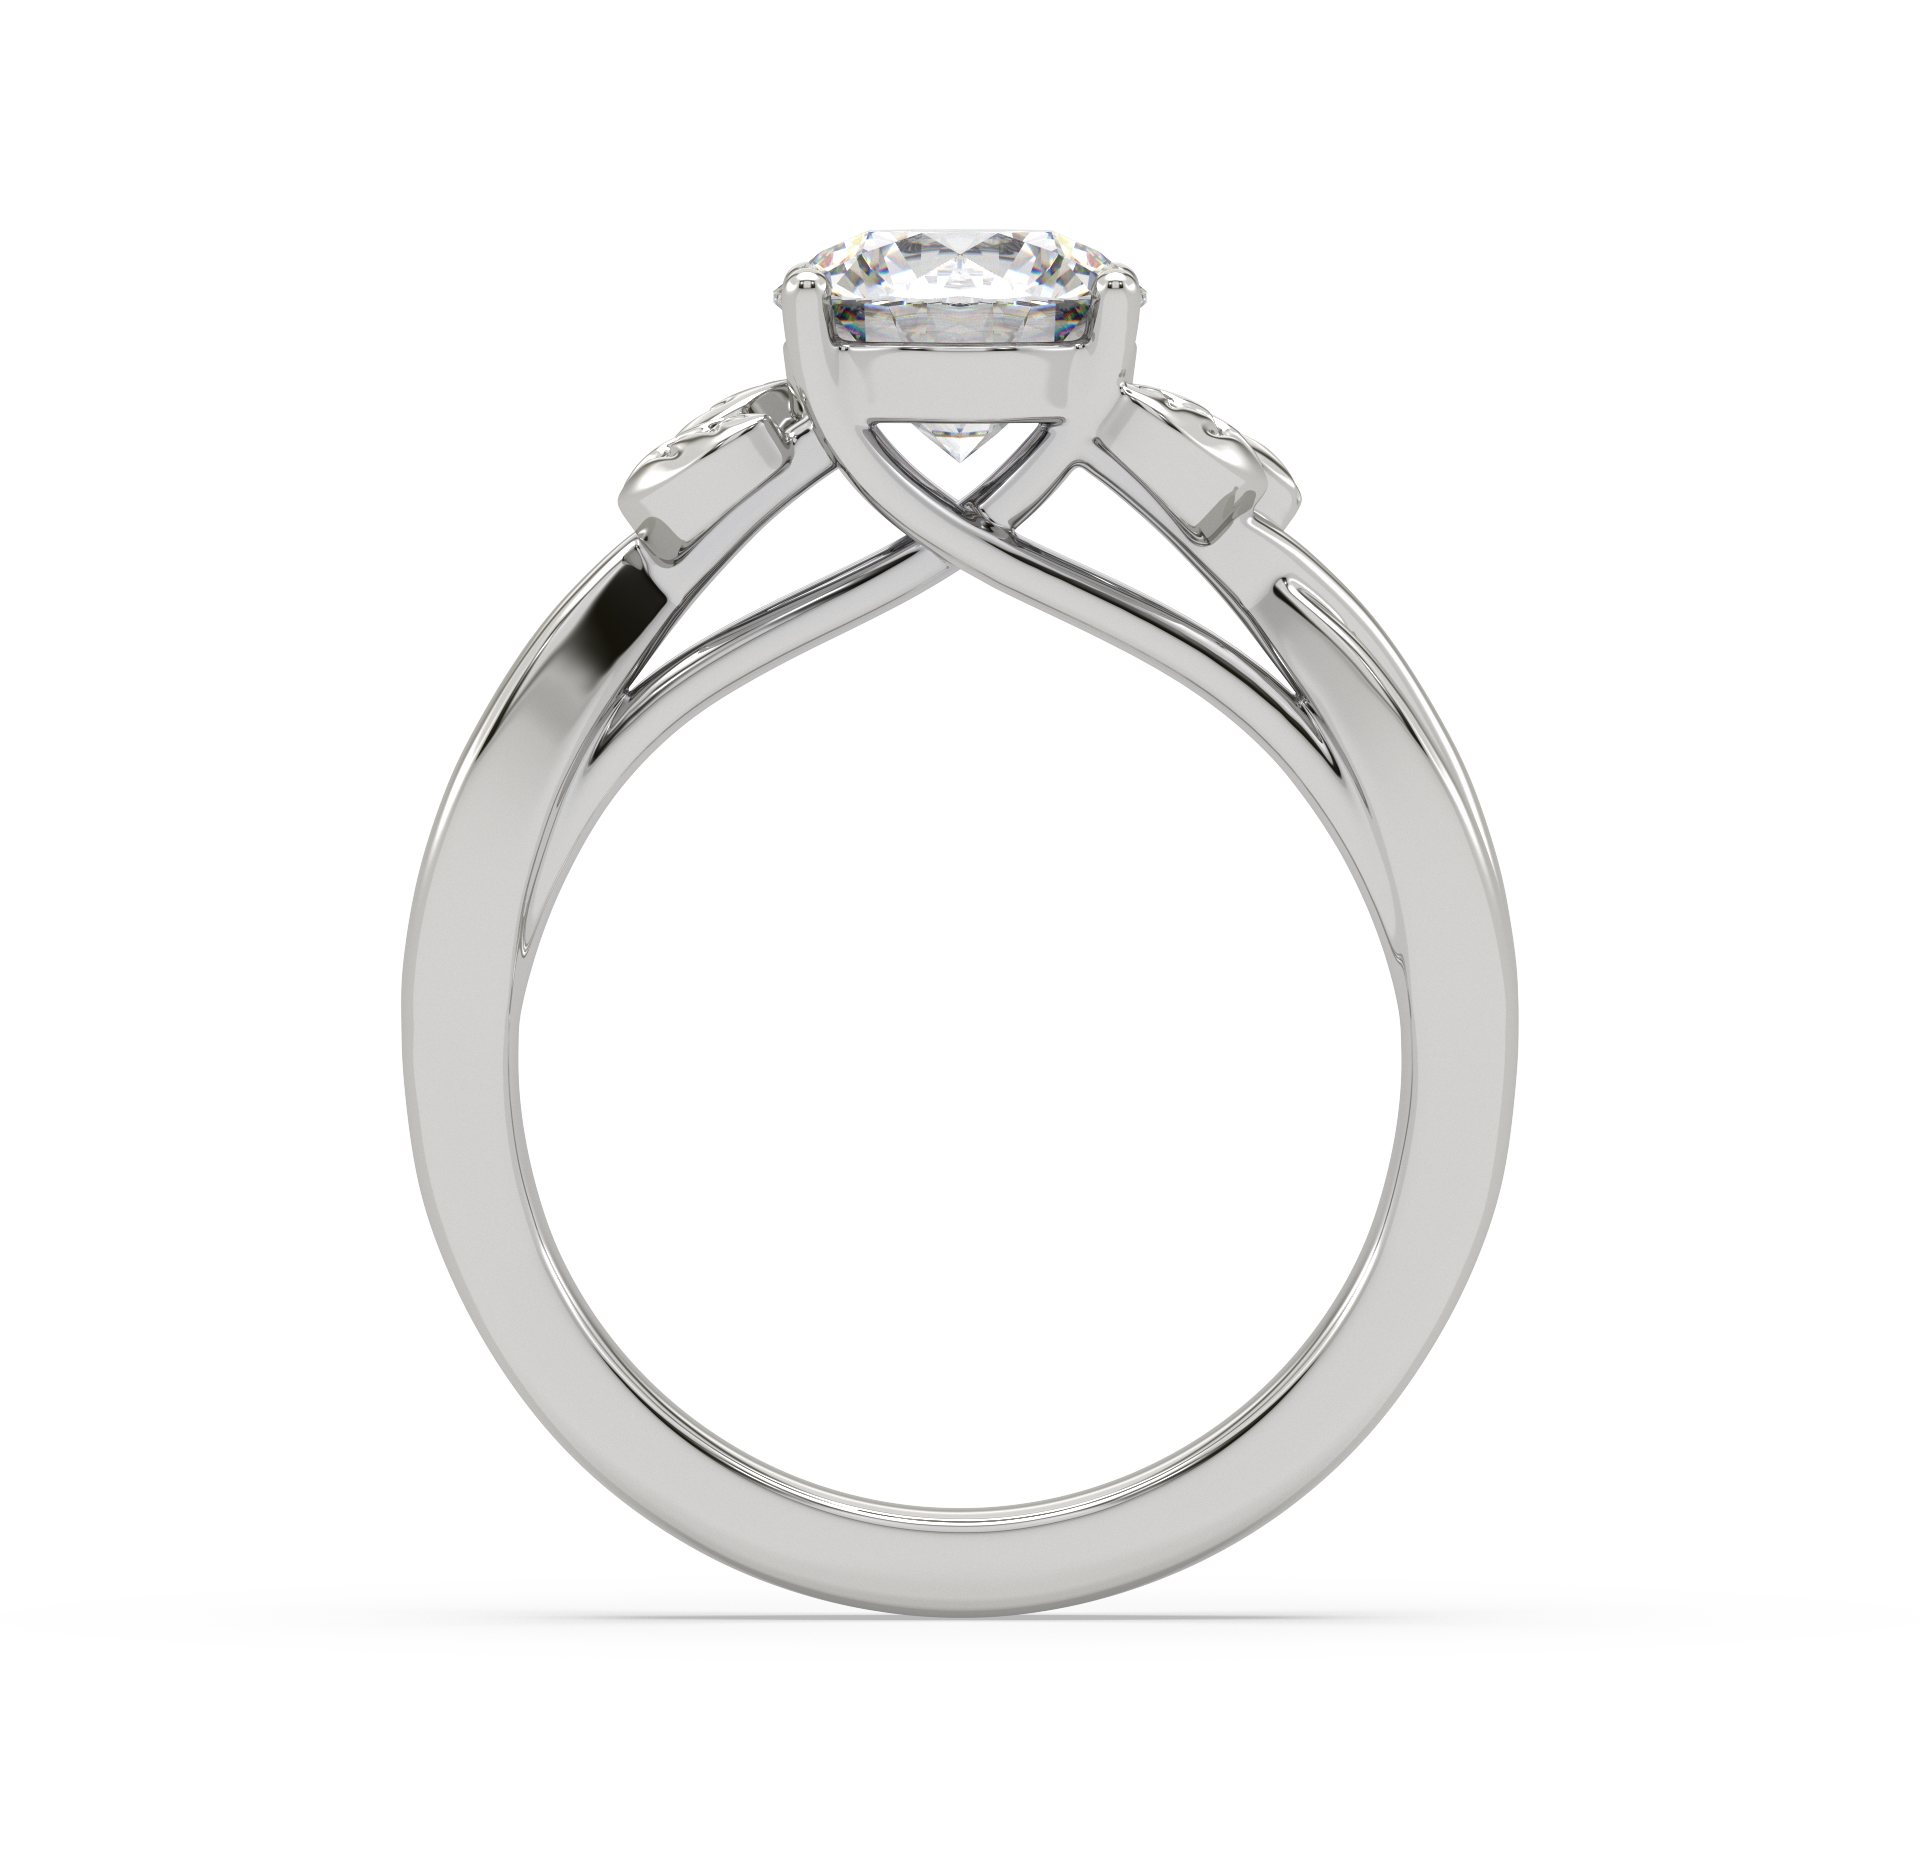 Erica Intertwined Solitaire Ring